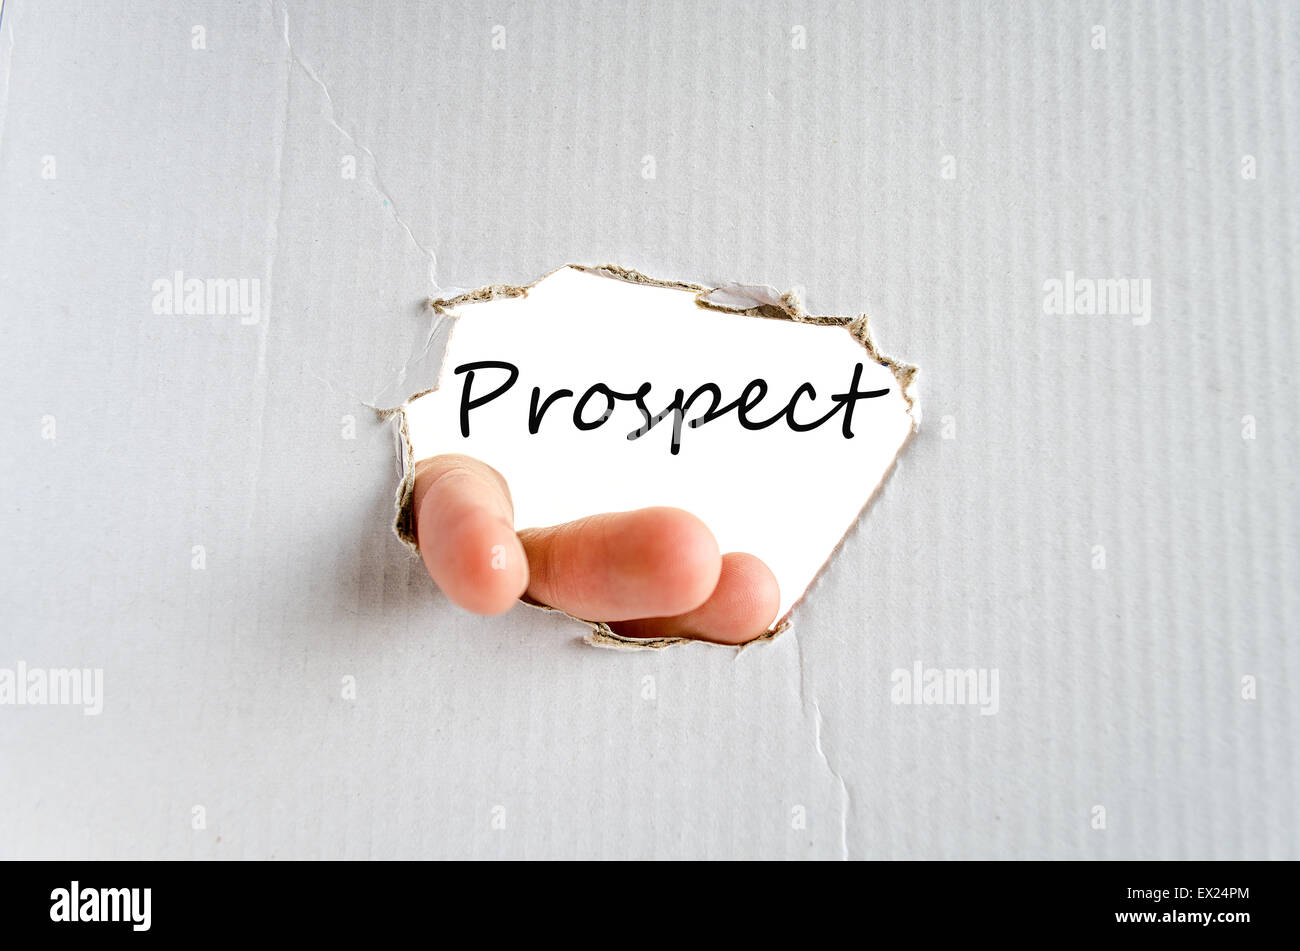 Hand and text concept on the cardboard background Stock Photo